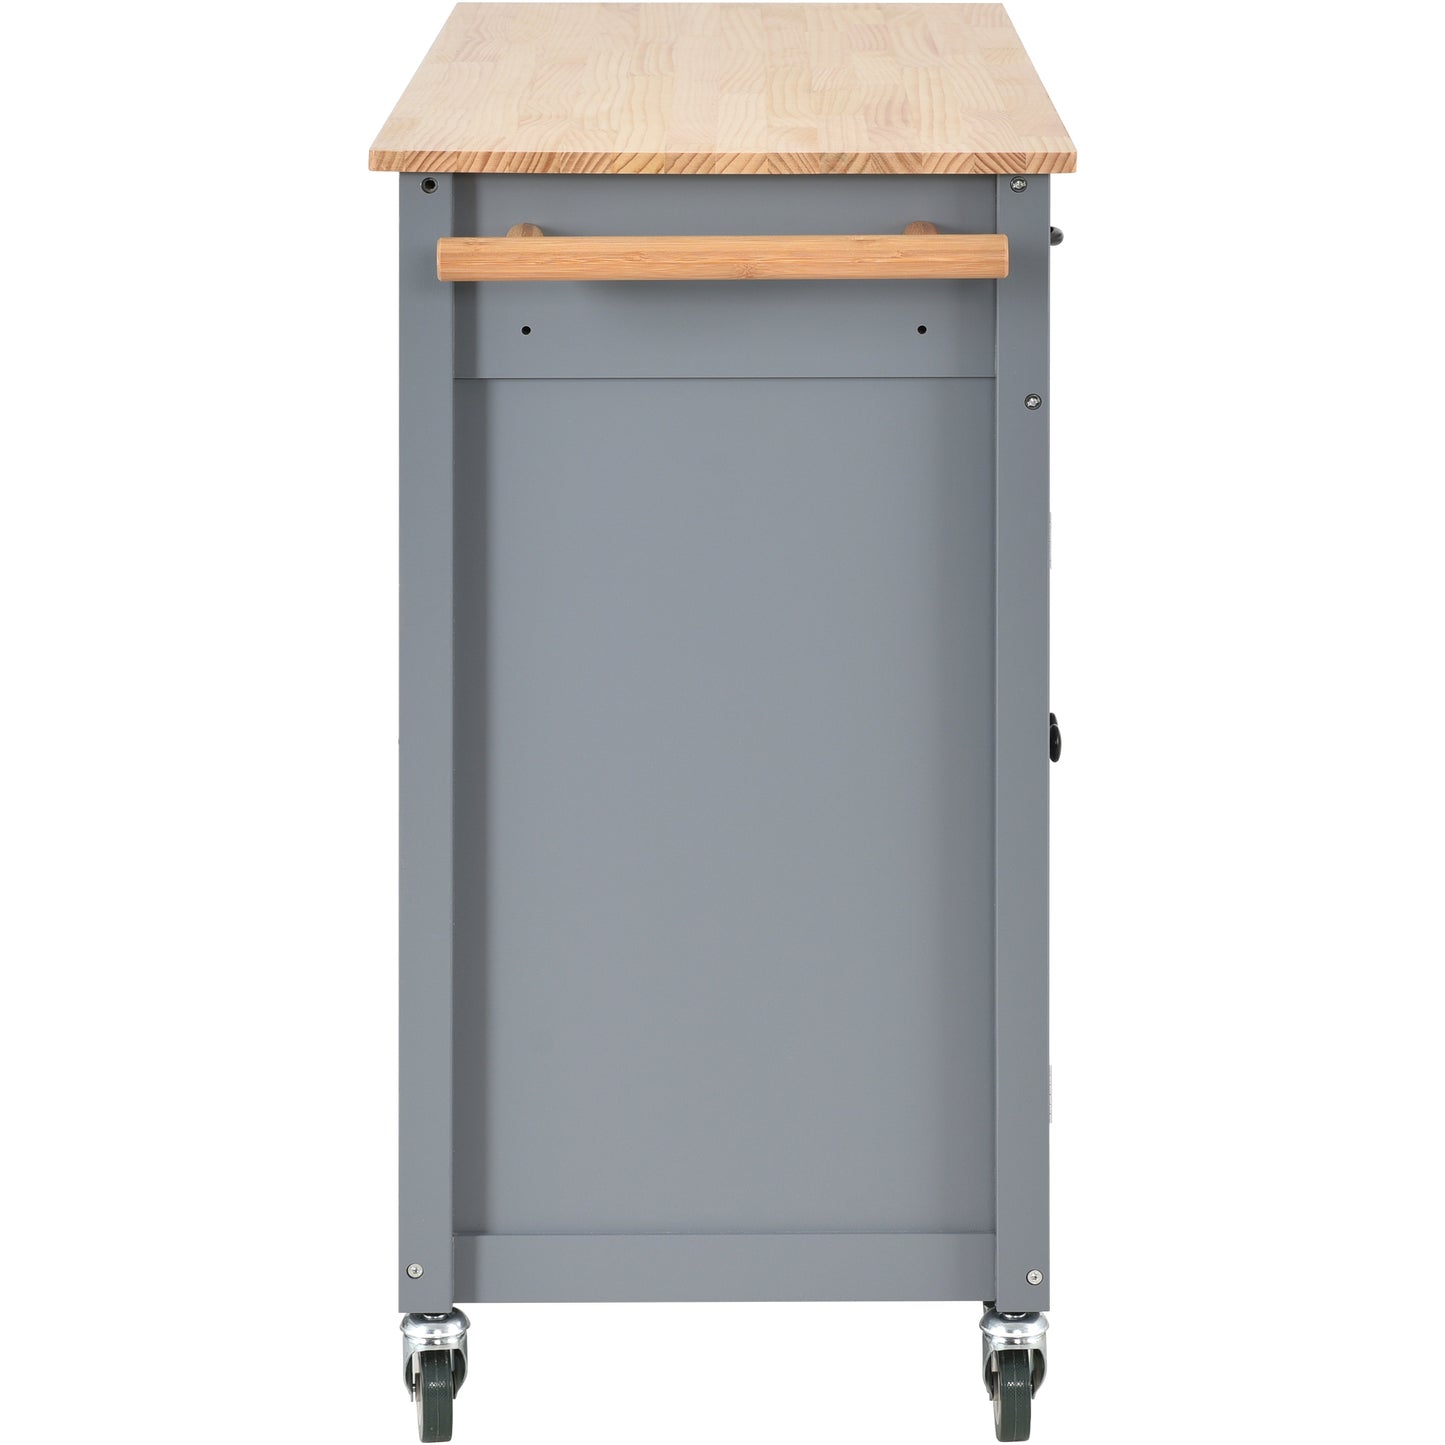 Kitchen Island Cart with Solid Wood Top and Locking Wheels,54.3 Inch Width,4 Door Cabinet and Two Drawers,Spice Rack, Towel Rack (Grey Blue)